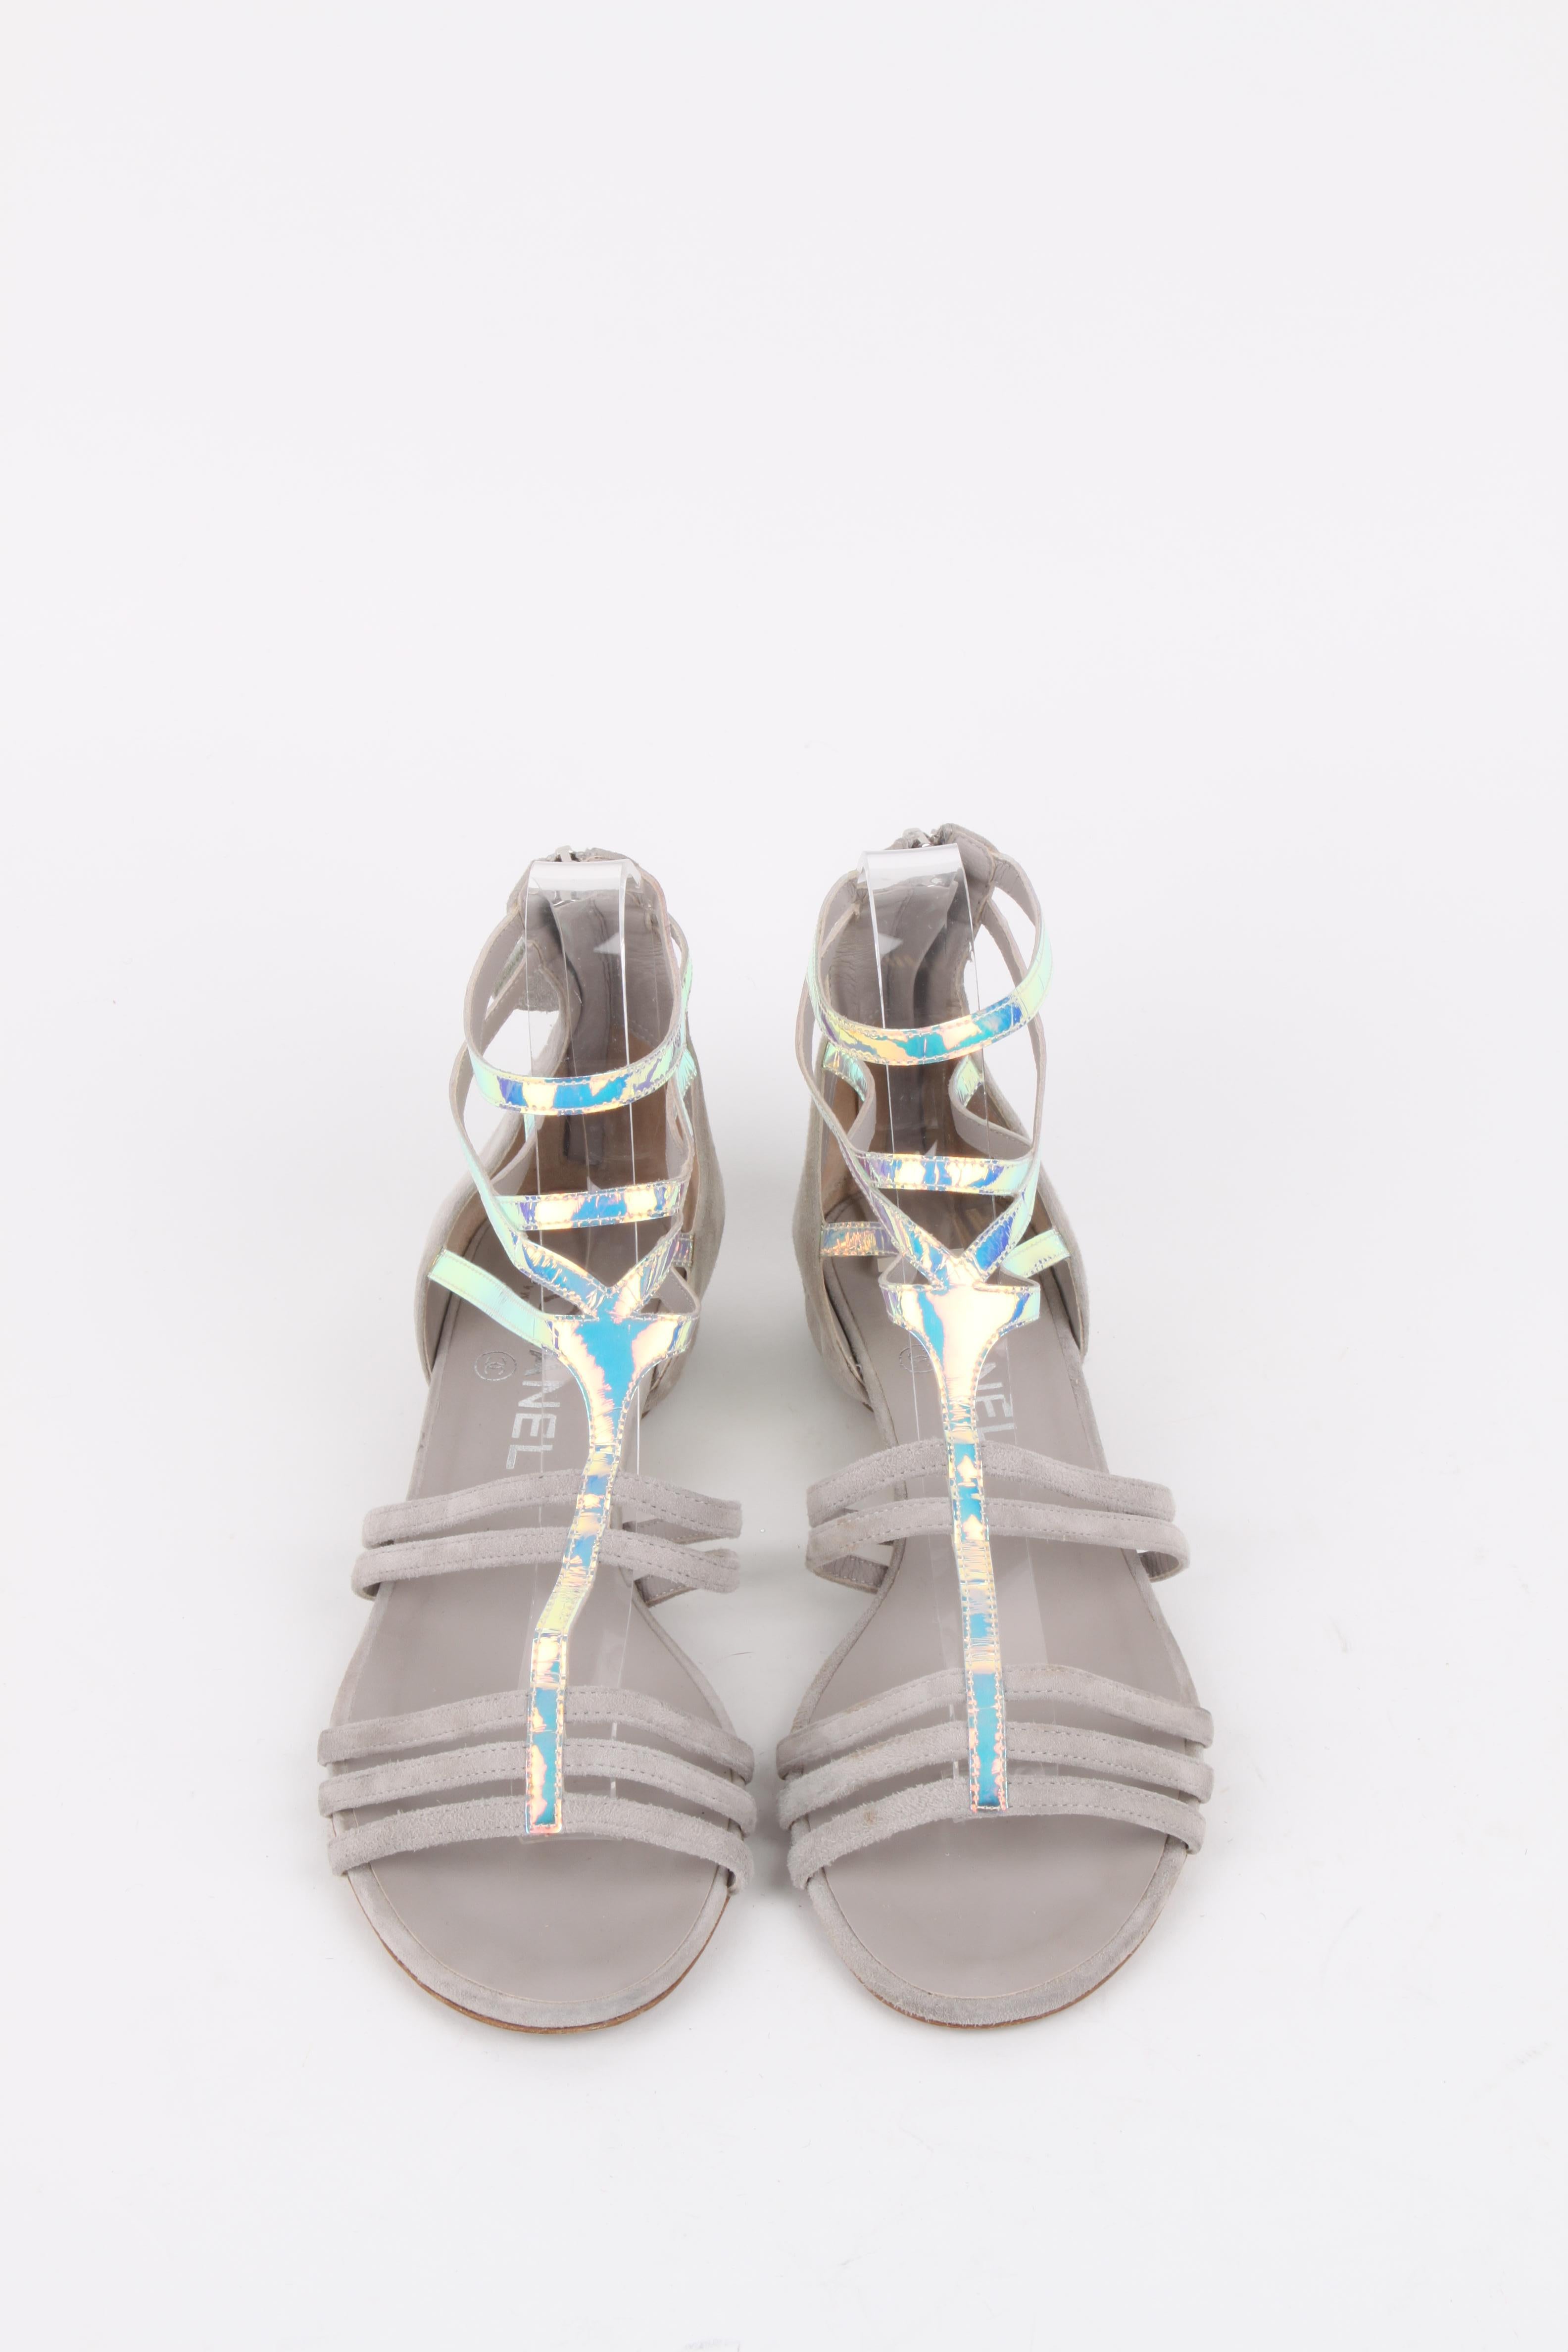 Chanel Grey Silver-Iridescent Gladiator Sandals.
From the house of Chanel comes this pair of silver-iridescent gladiator sandals that are simply splendid. They've been crafted from leather and styled with full back zippers and little ribbed motifs